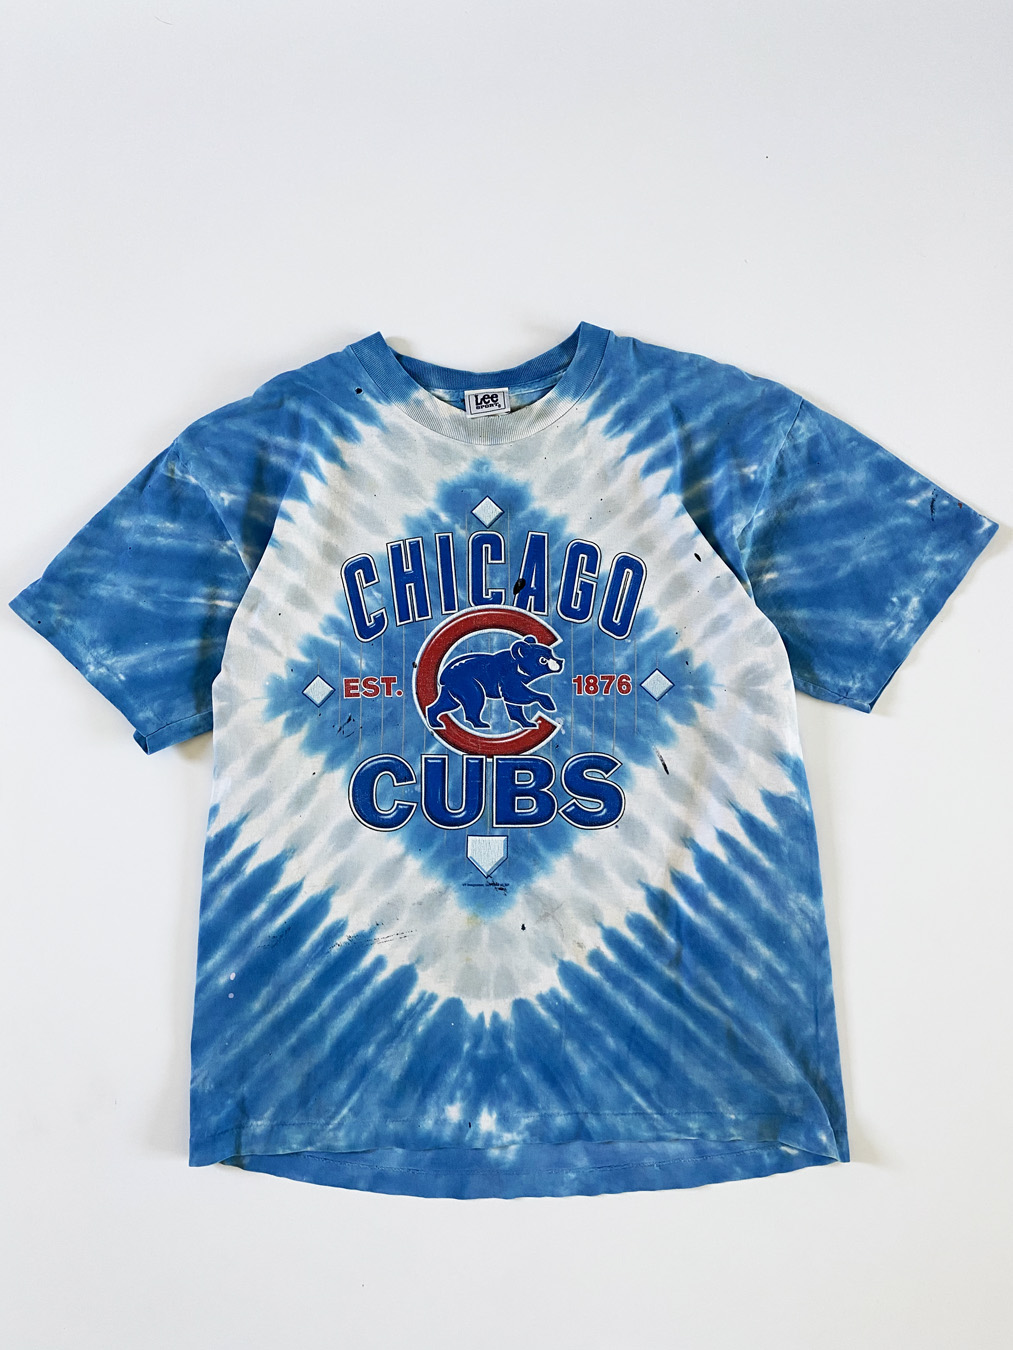 Large Vintage 2005 Chicago Cubs Tee 